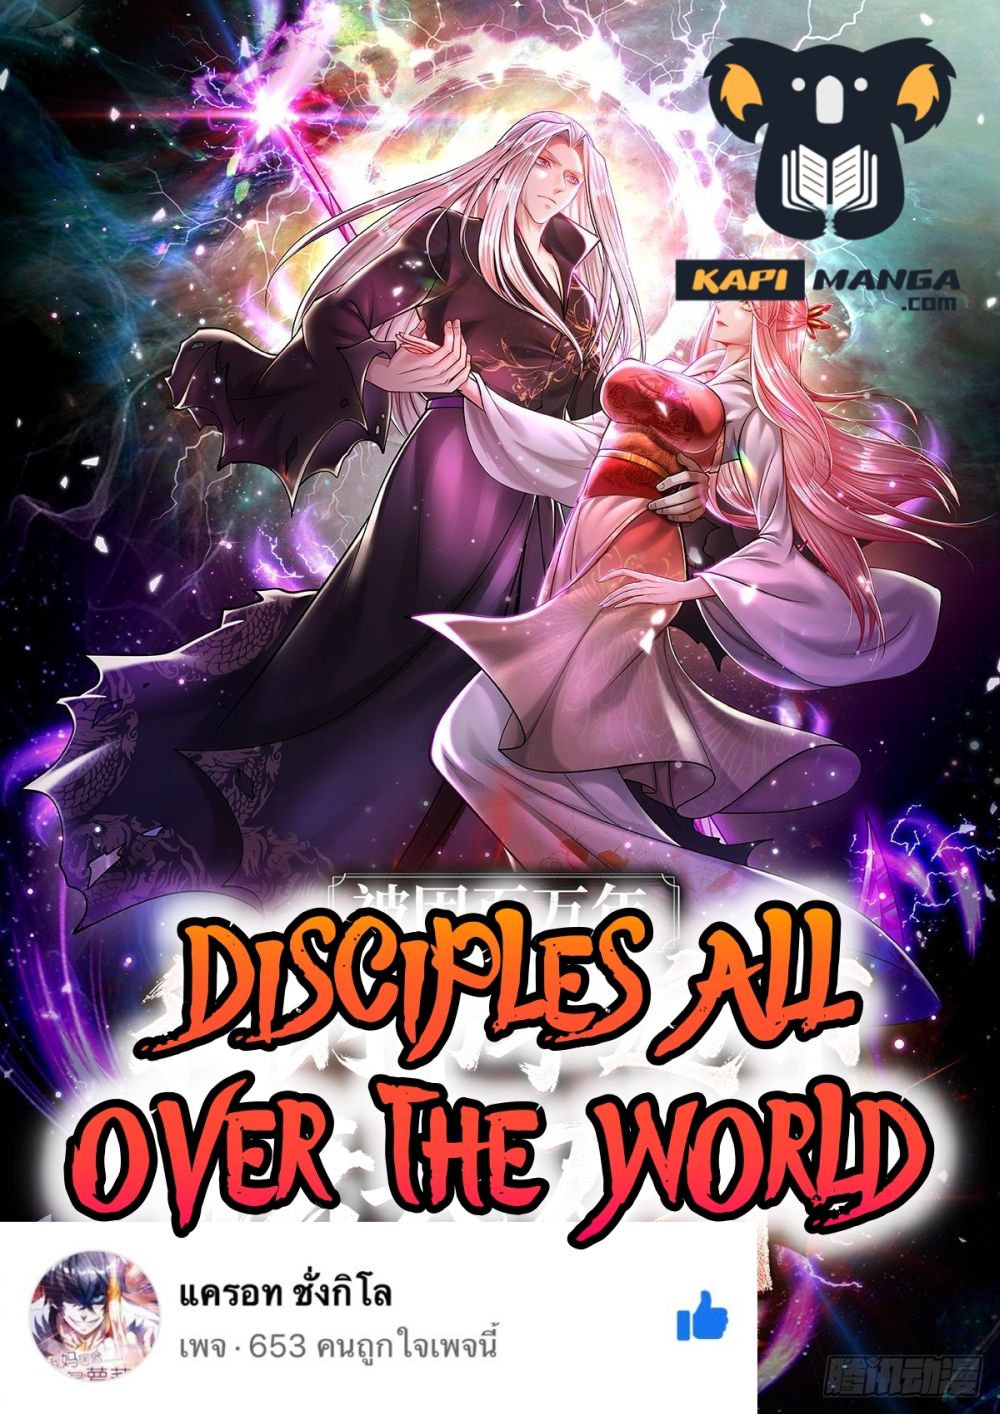 Disciples All Over the World à¸à¸­à¸à¸à¸µà¹ 37 (1)